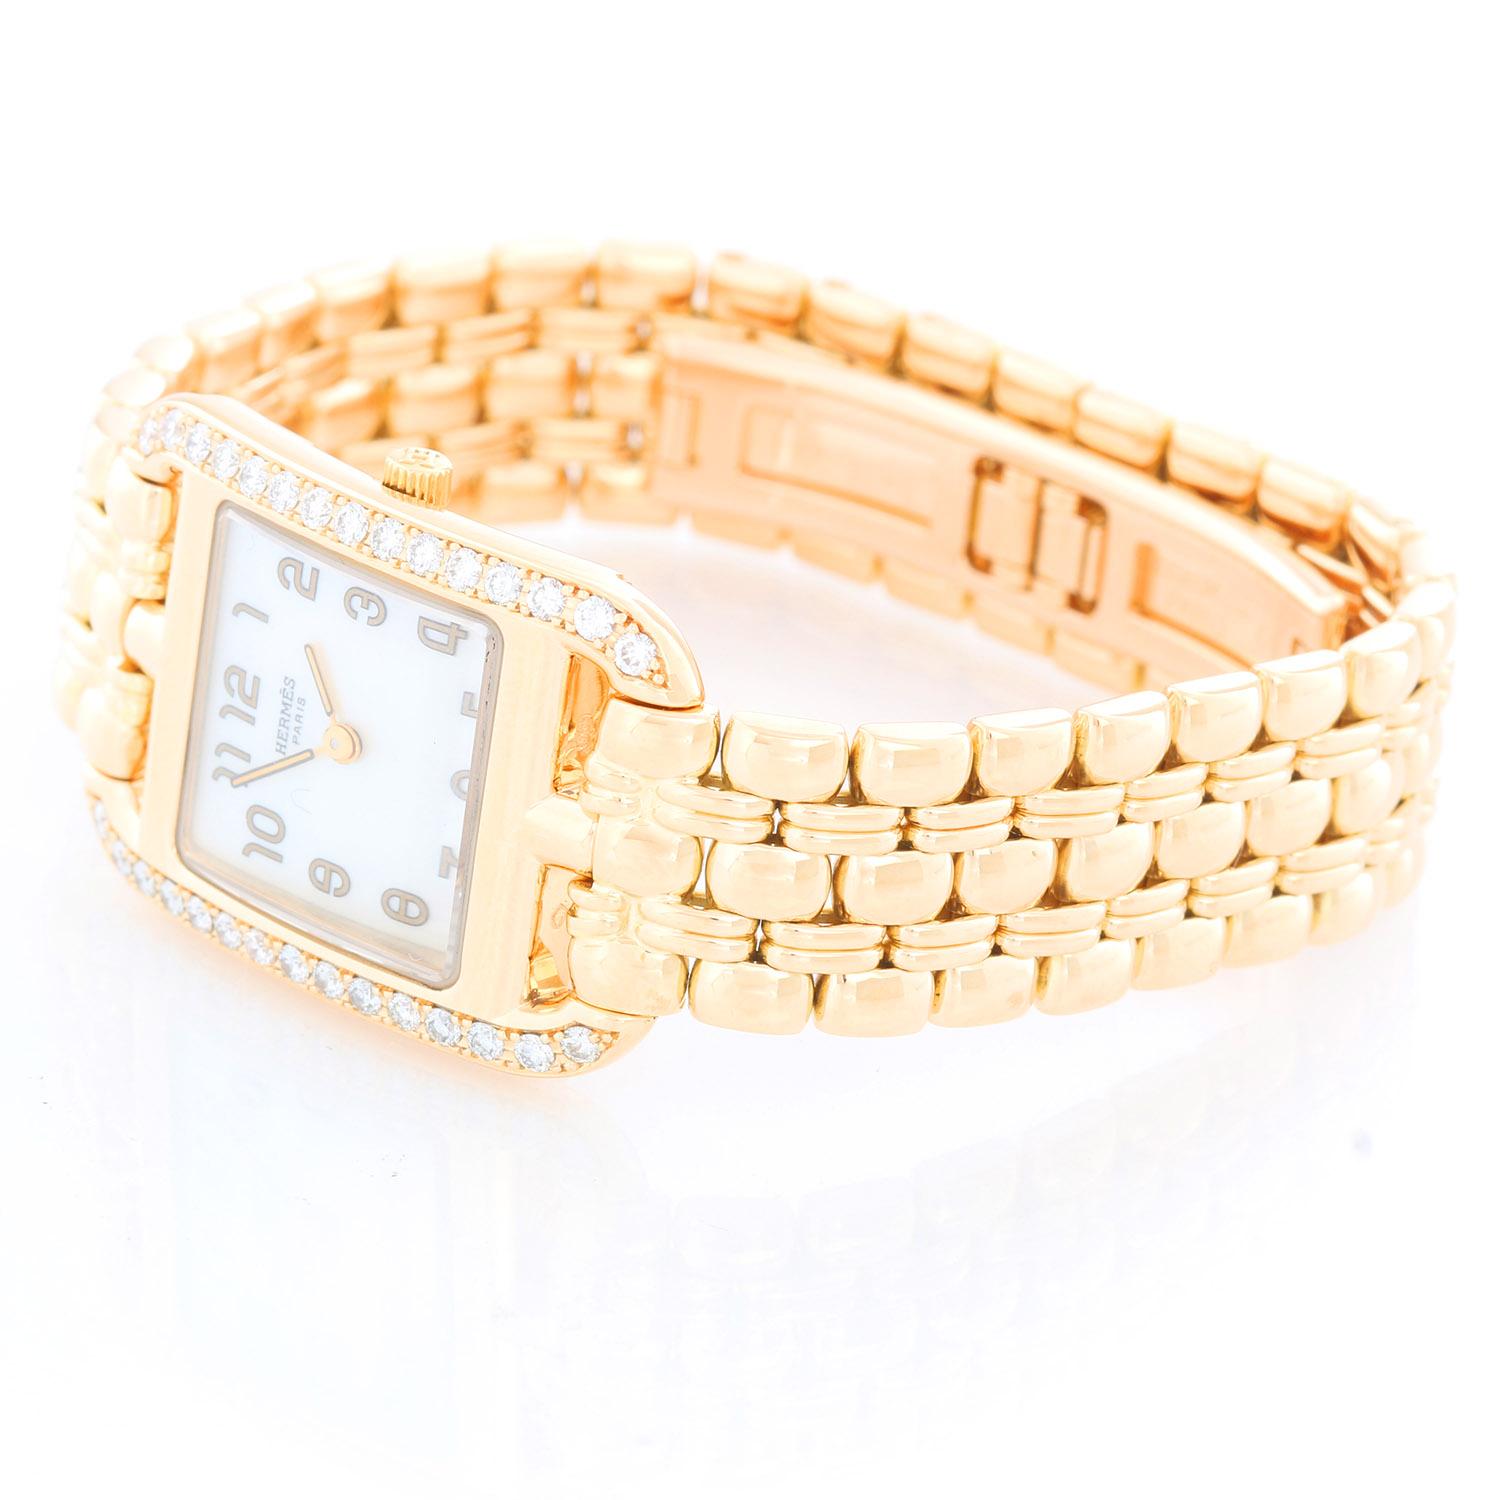 Hermes Cape Cod Yellow Gold Ladies  Watch CC1.288 - Quartz. 18K Yellow gold ( 23 x 23 mm ) with diamond bezel . White mother of pearl watch with Arabic numerals.  18K Yellow gold Hermes bracelet; will fit 6 1/4 inch wrist. Pre-owned with Hermes box